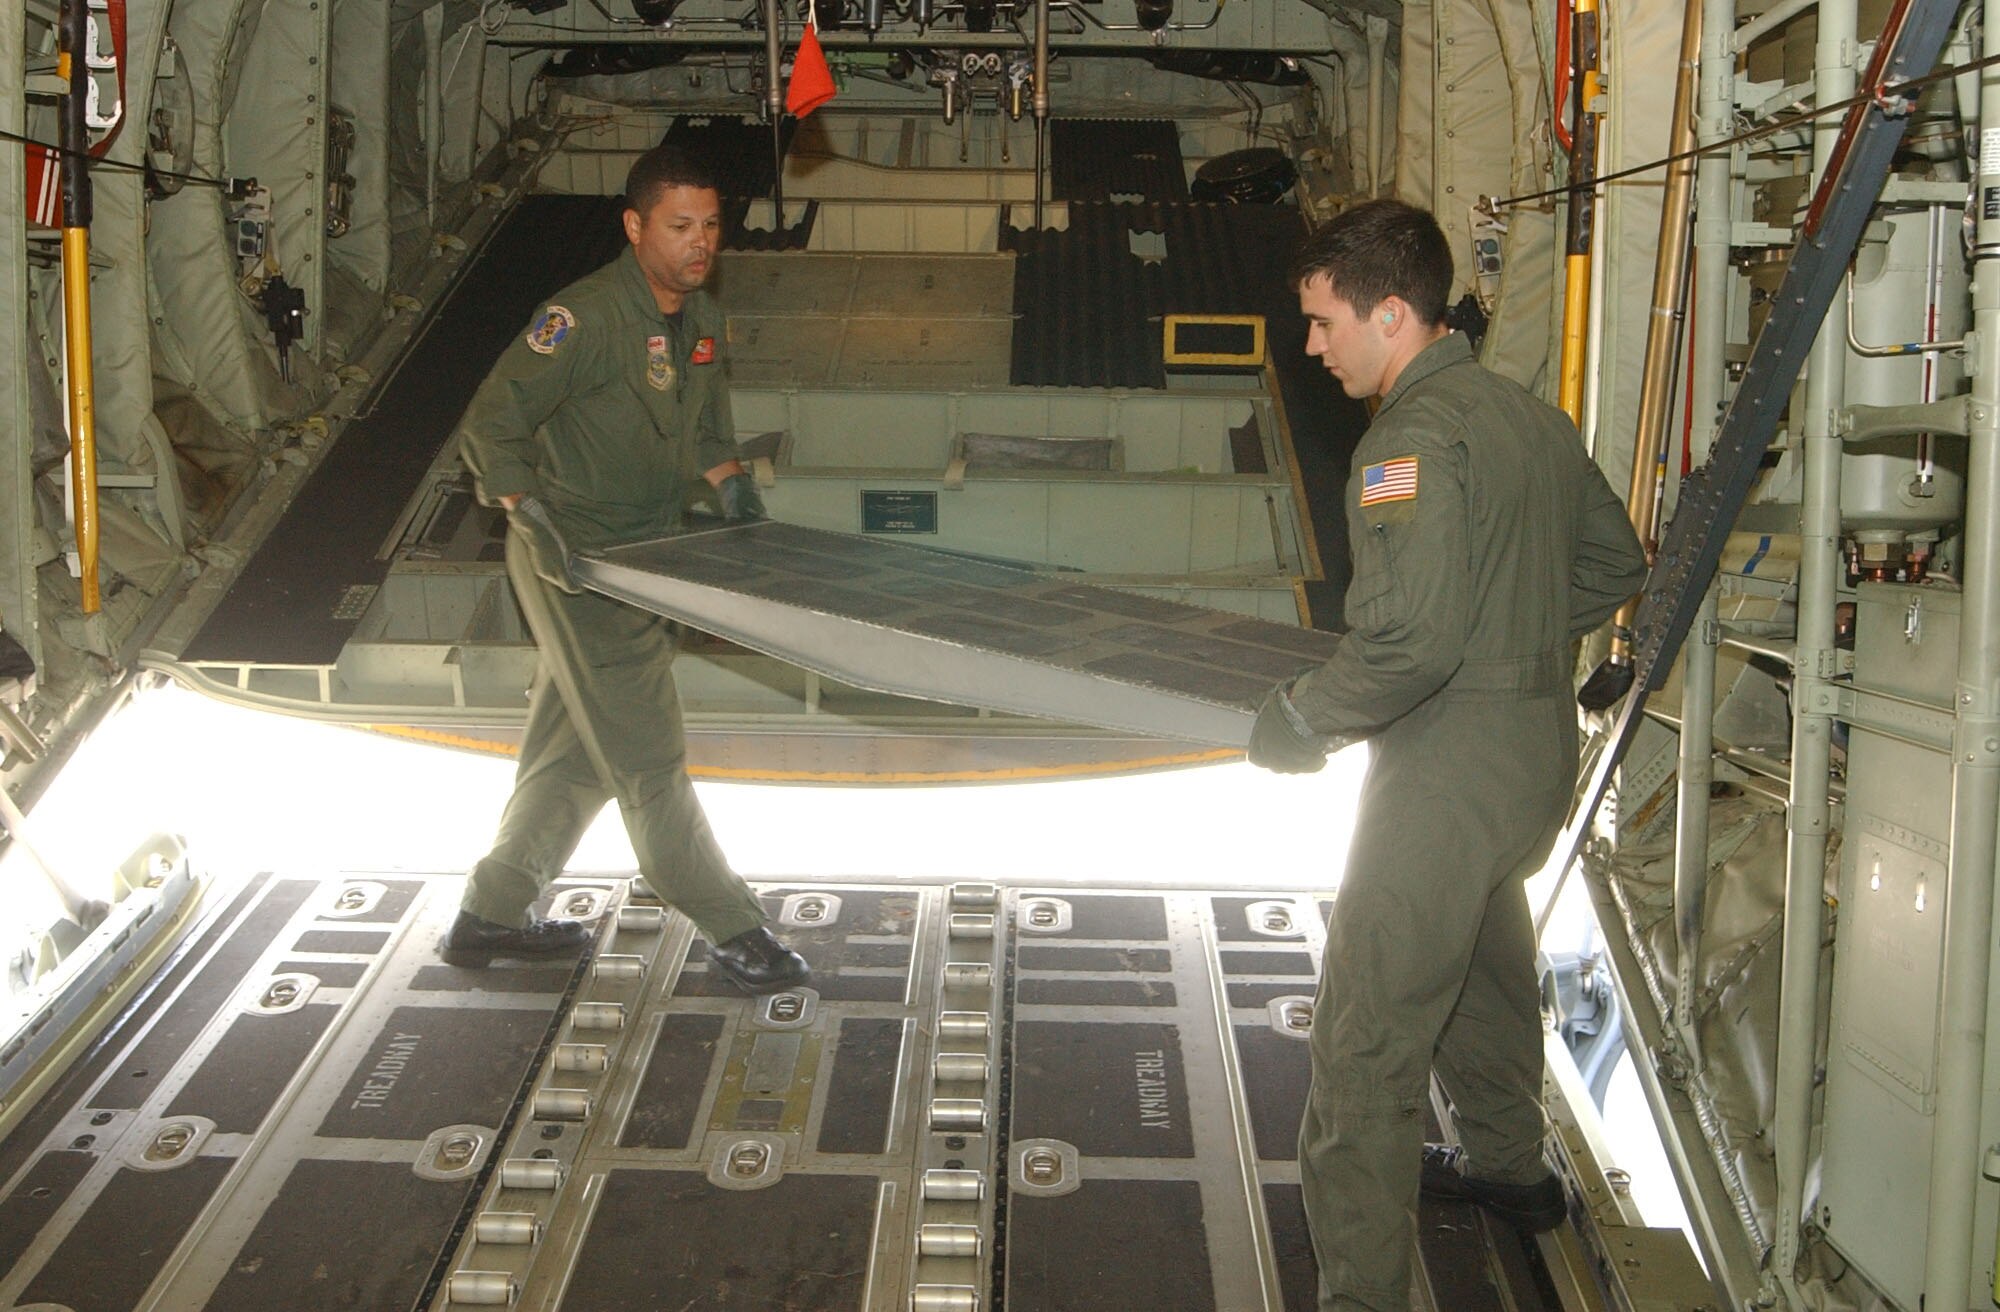 SOTO CANO AIR BASE, Honduras – Senior Airman Brandon Krantz, right, and Tech. Sgt. Will Morales, both loadmasters with the 135th Airlift Squadron, Maryland Air National Guard, configure the interior of a C-130J prior to a relief mission to Peru Aug. 17. The aircrew is taking approximately 30 Soldiers and Airmen who are responding to the Aug. 15 earthquake in Peru and are taking with them 4,470 pounds of medical supplies for relief efforts.  (US Air Force photo by Tech. Sgt. Sonny Cohrs)